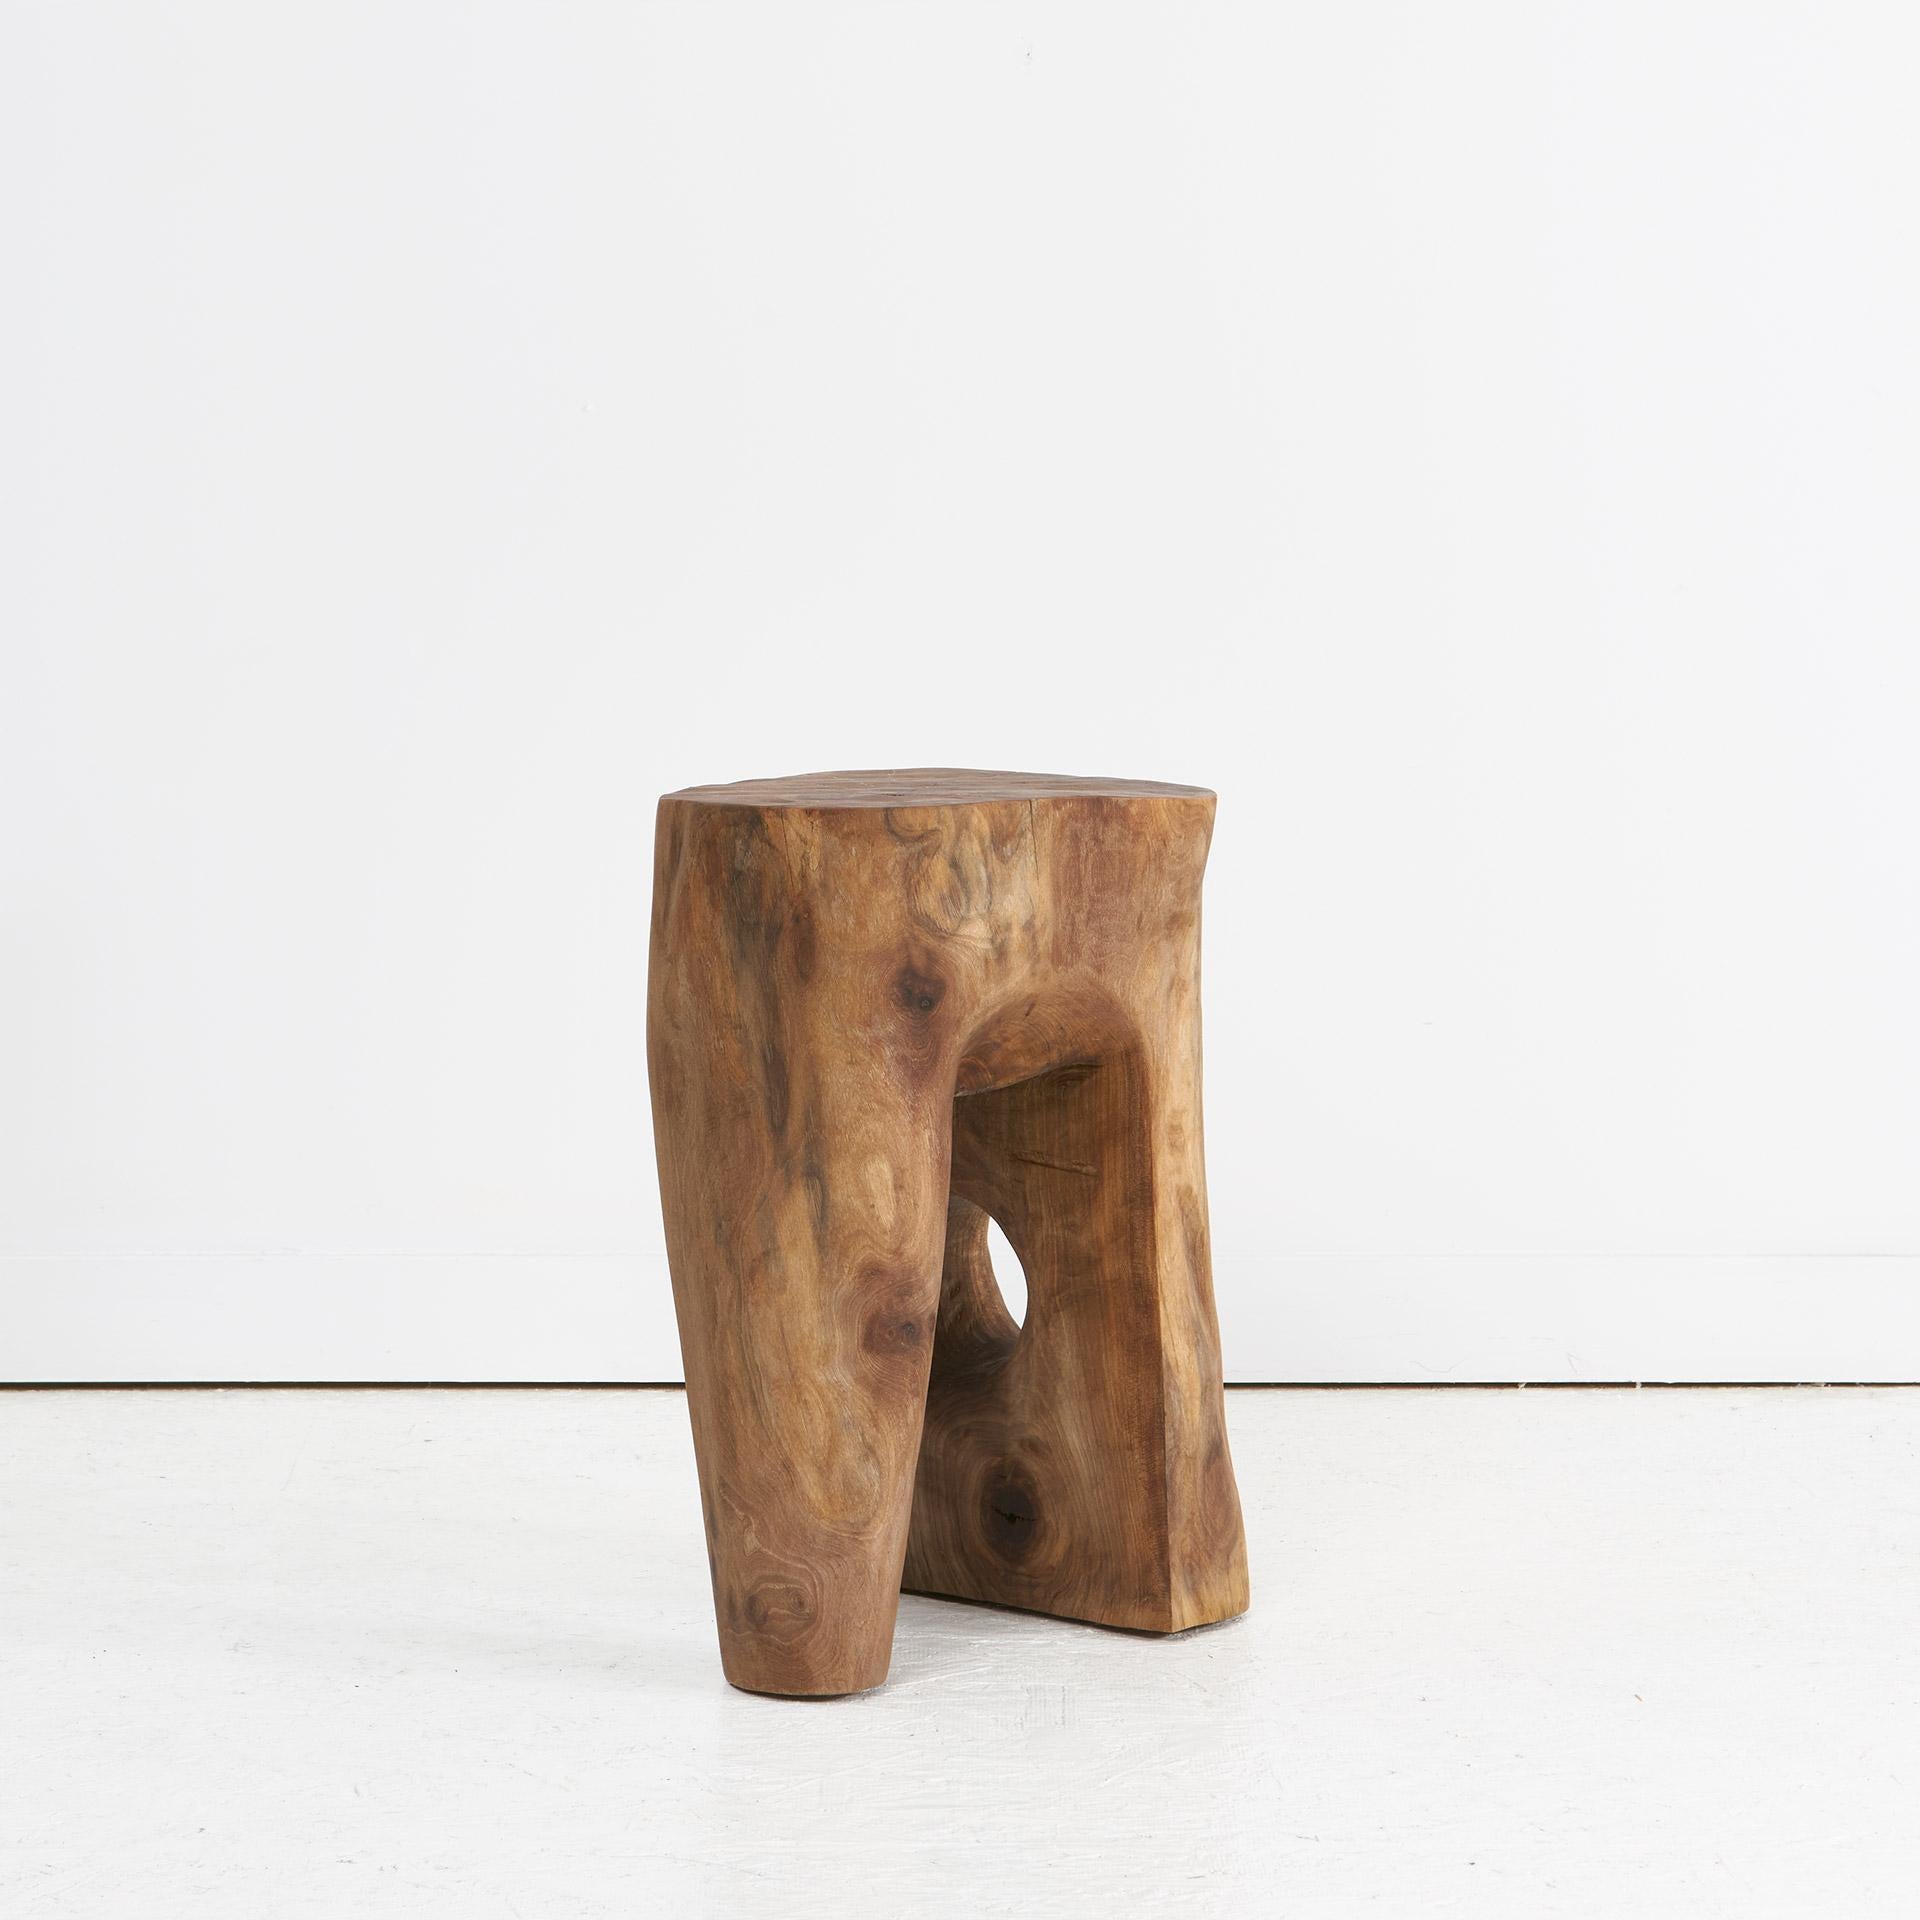 Hand-carved Vince Skelley wooden stool or side table. One of a kind, made from walnut wood in Portland, Or.